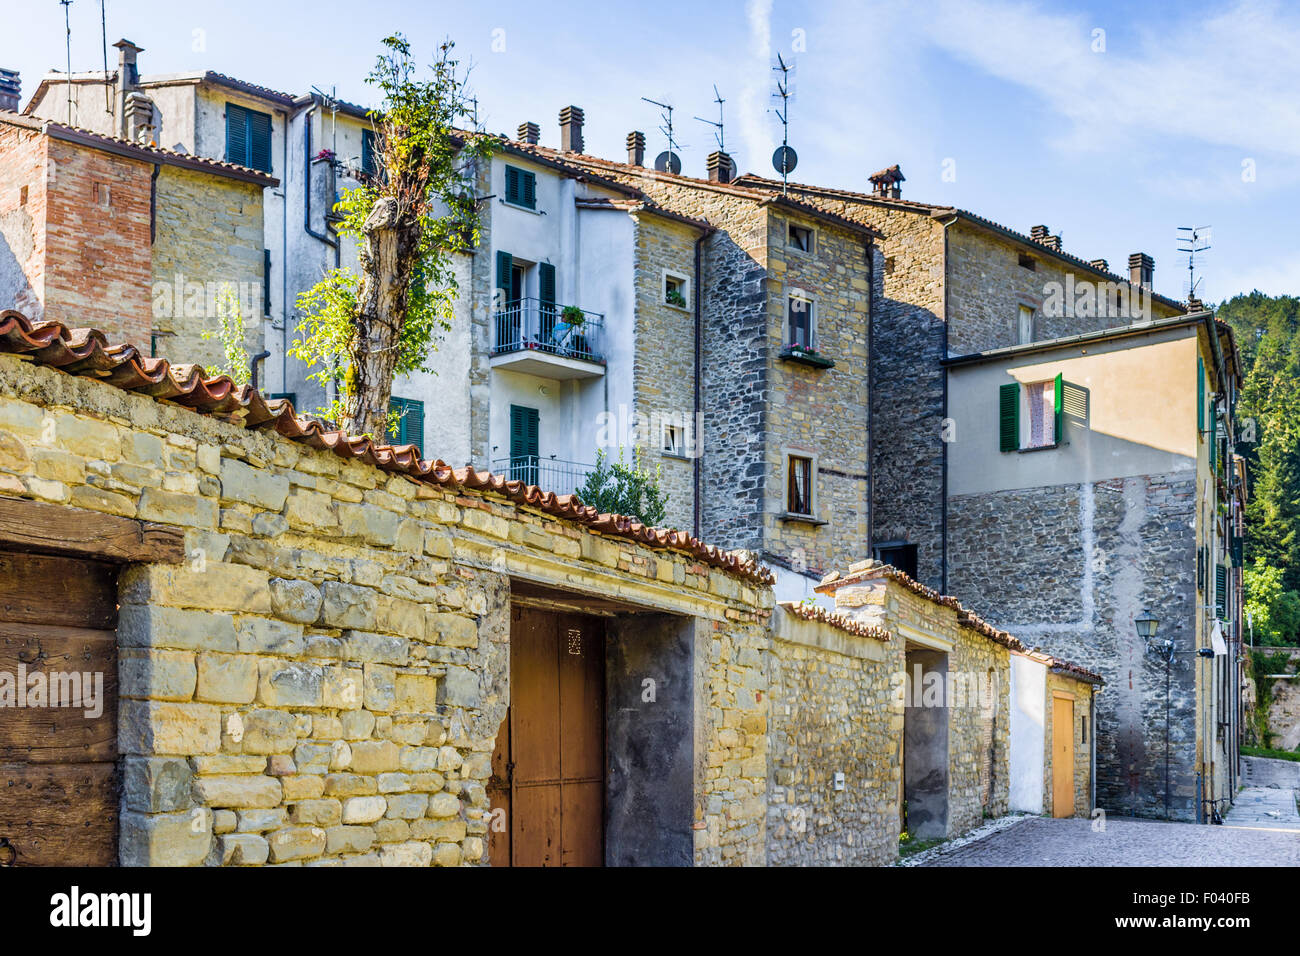 back in time and far from stress following the streets of a typical small hill village in the countryside of Romagna in northern Italy Stock Photo